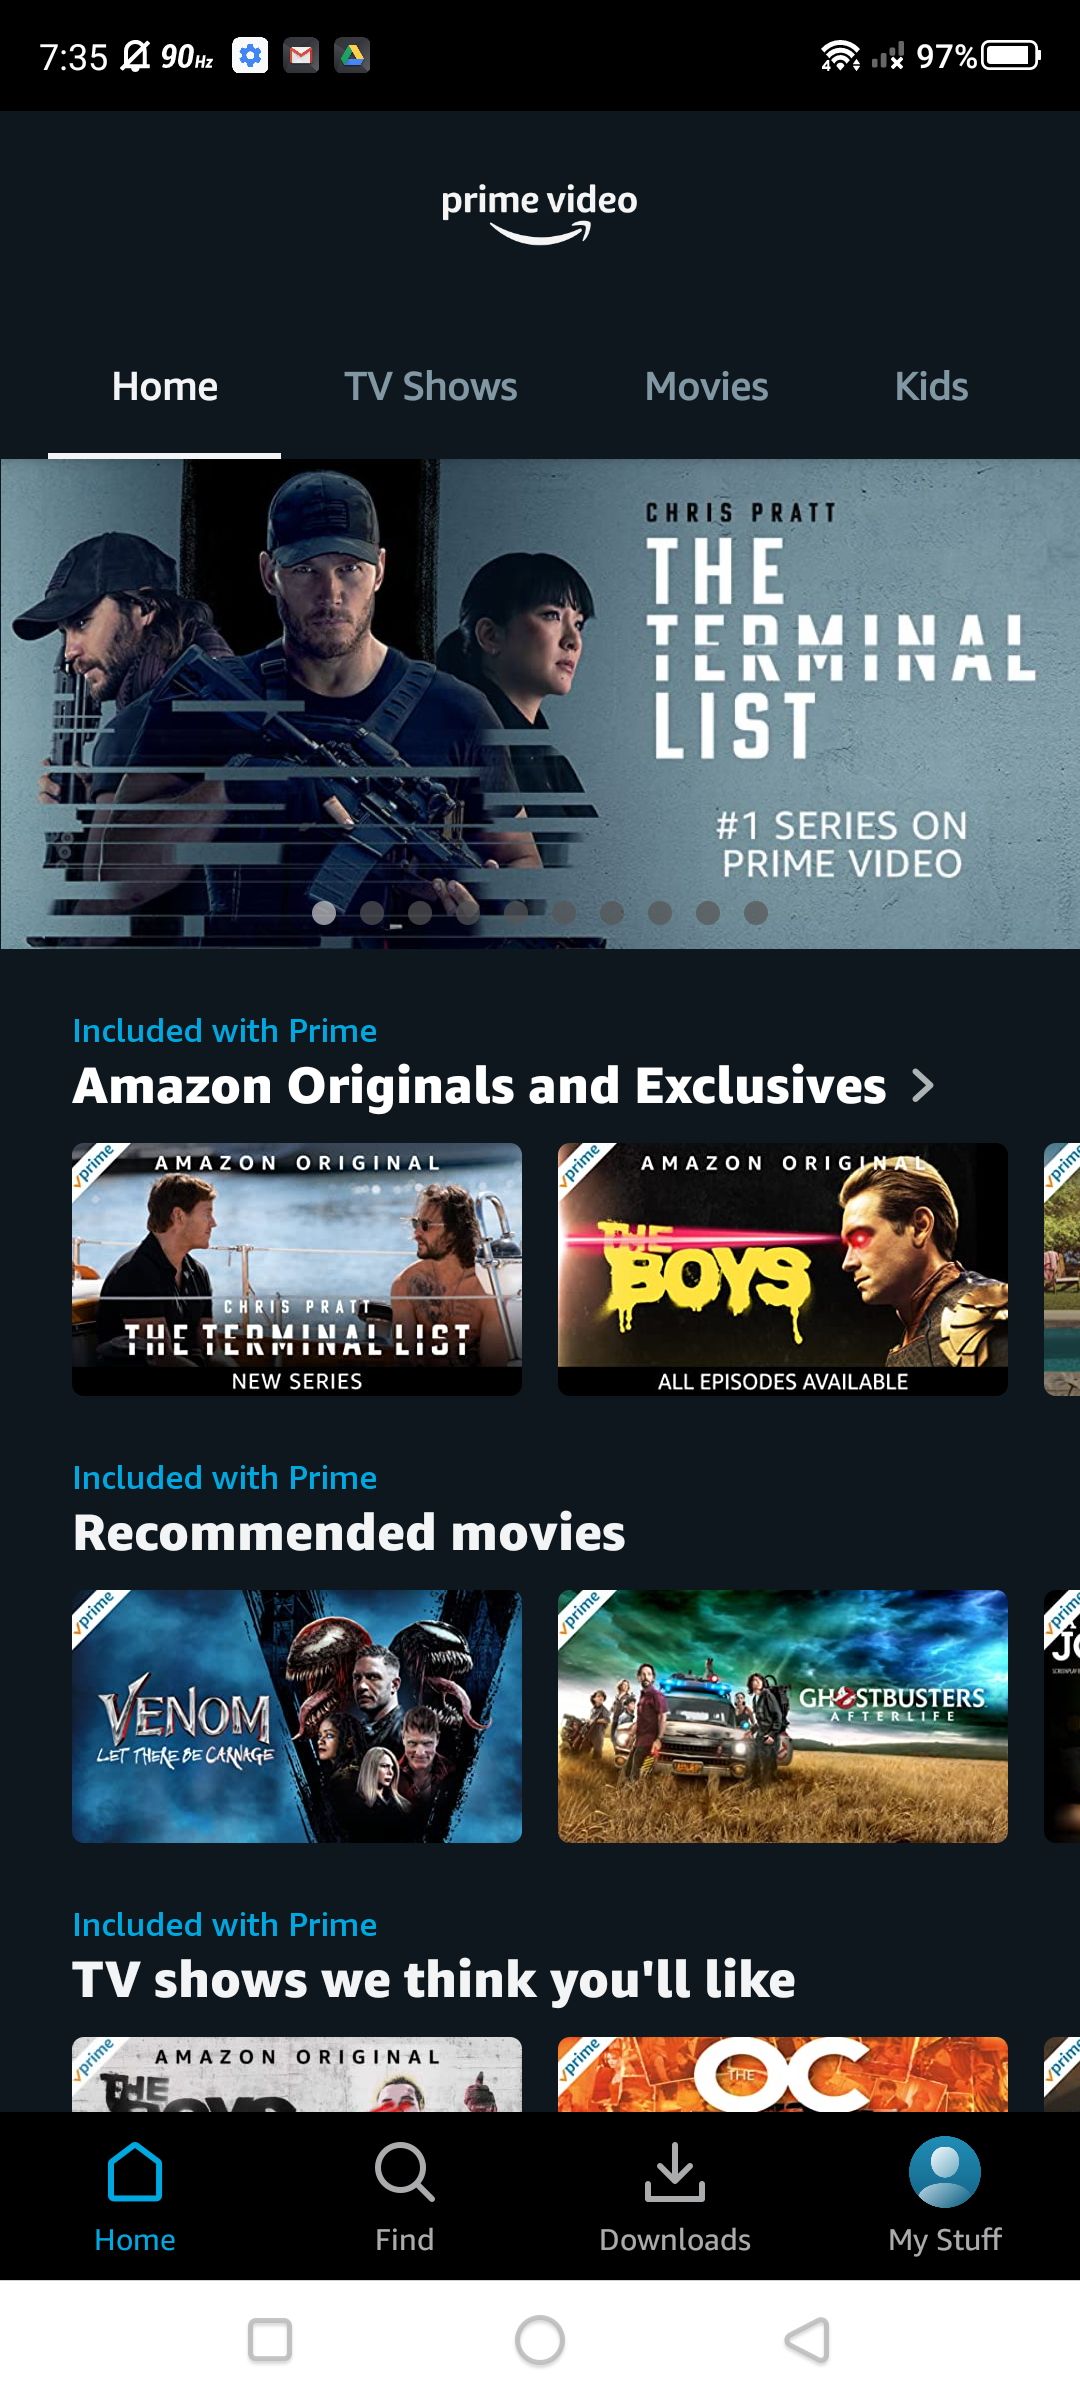 How to share your Amazon Prime Video login with Amazon Household